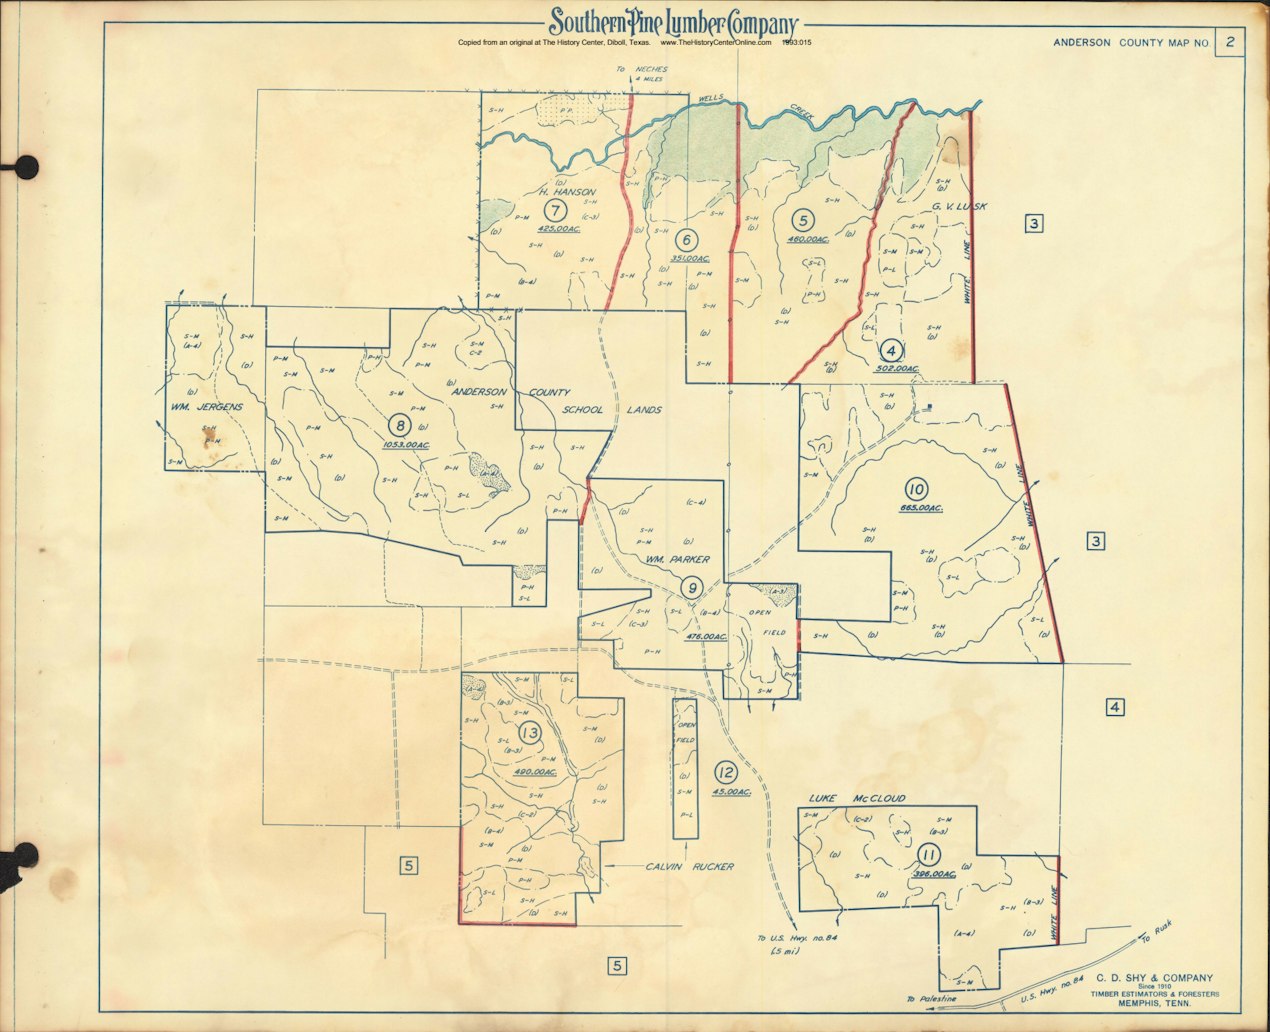 004 1955 Anderson County Timberlands Map 02